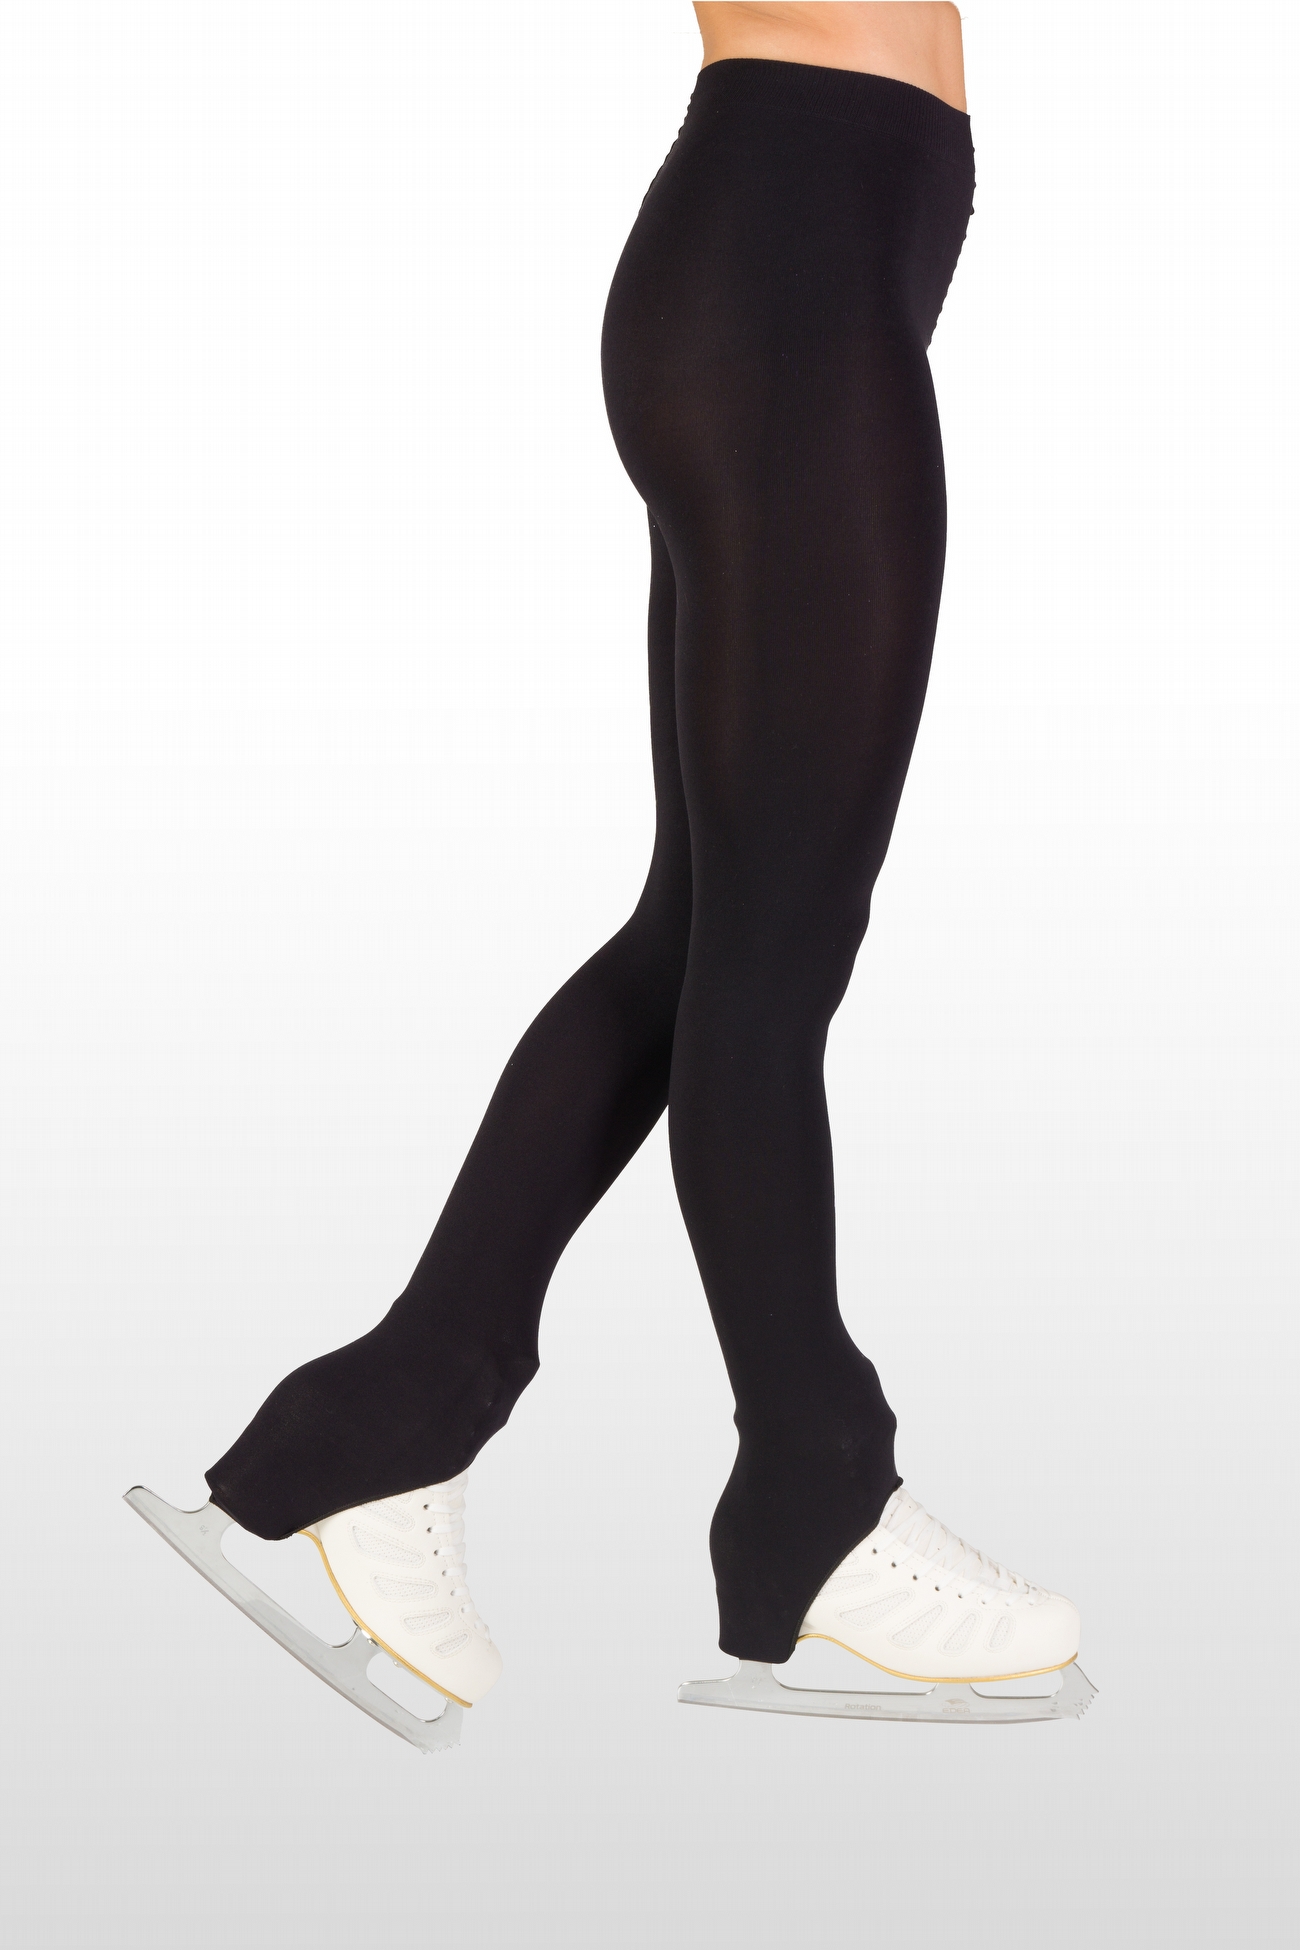 Buy online Skating OVER THE HEEL TIGHTS 100 DEN made in Italy